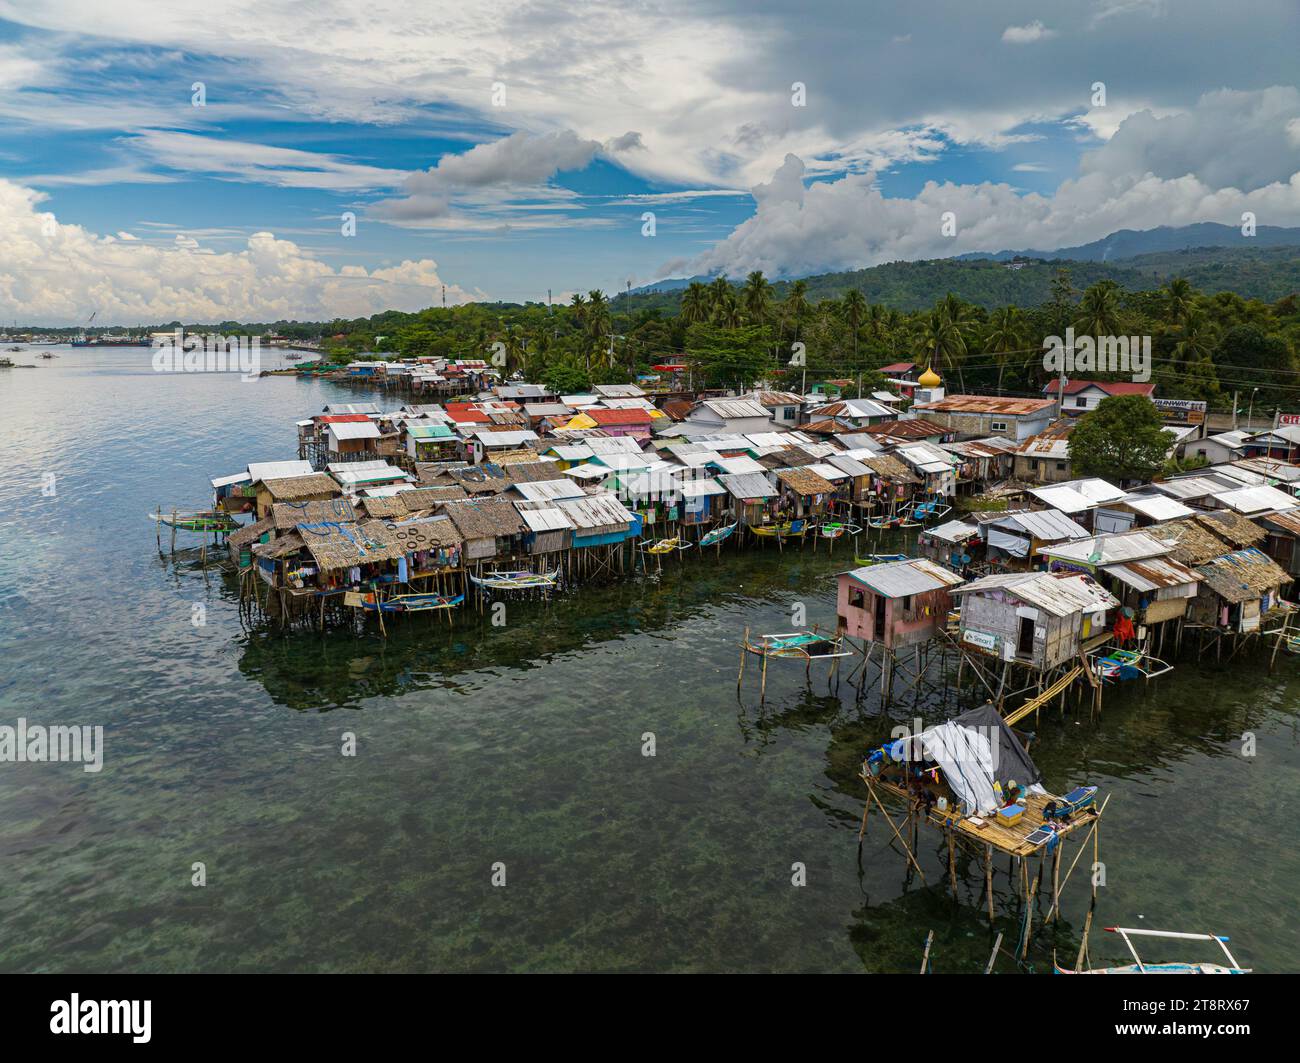 Boats beside stilt houses in Zamboanga raised on stilts. Clear sea water with turquoise water. Mindanao, Philippines. Stock Photo